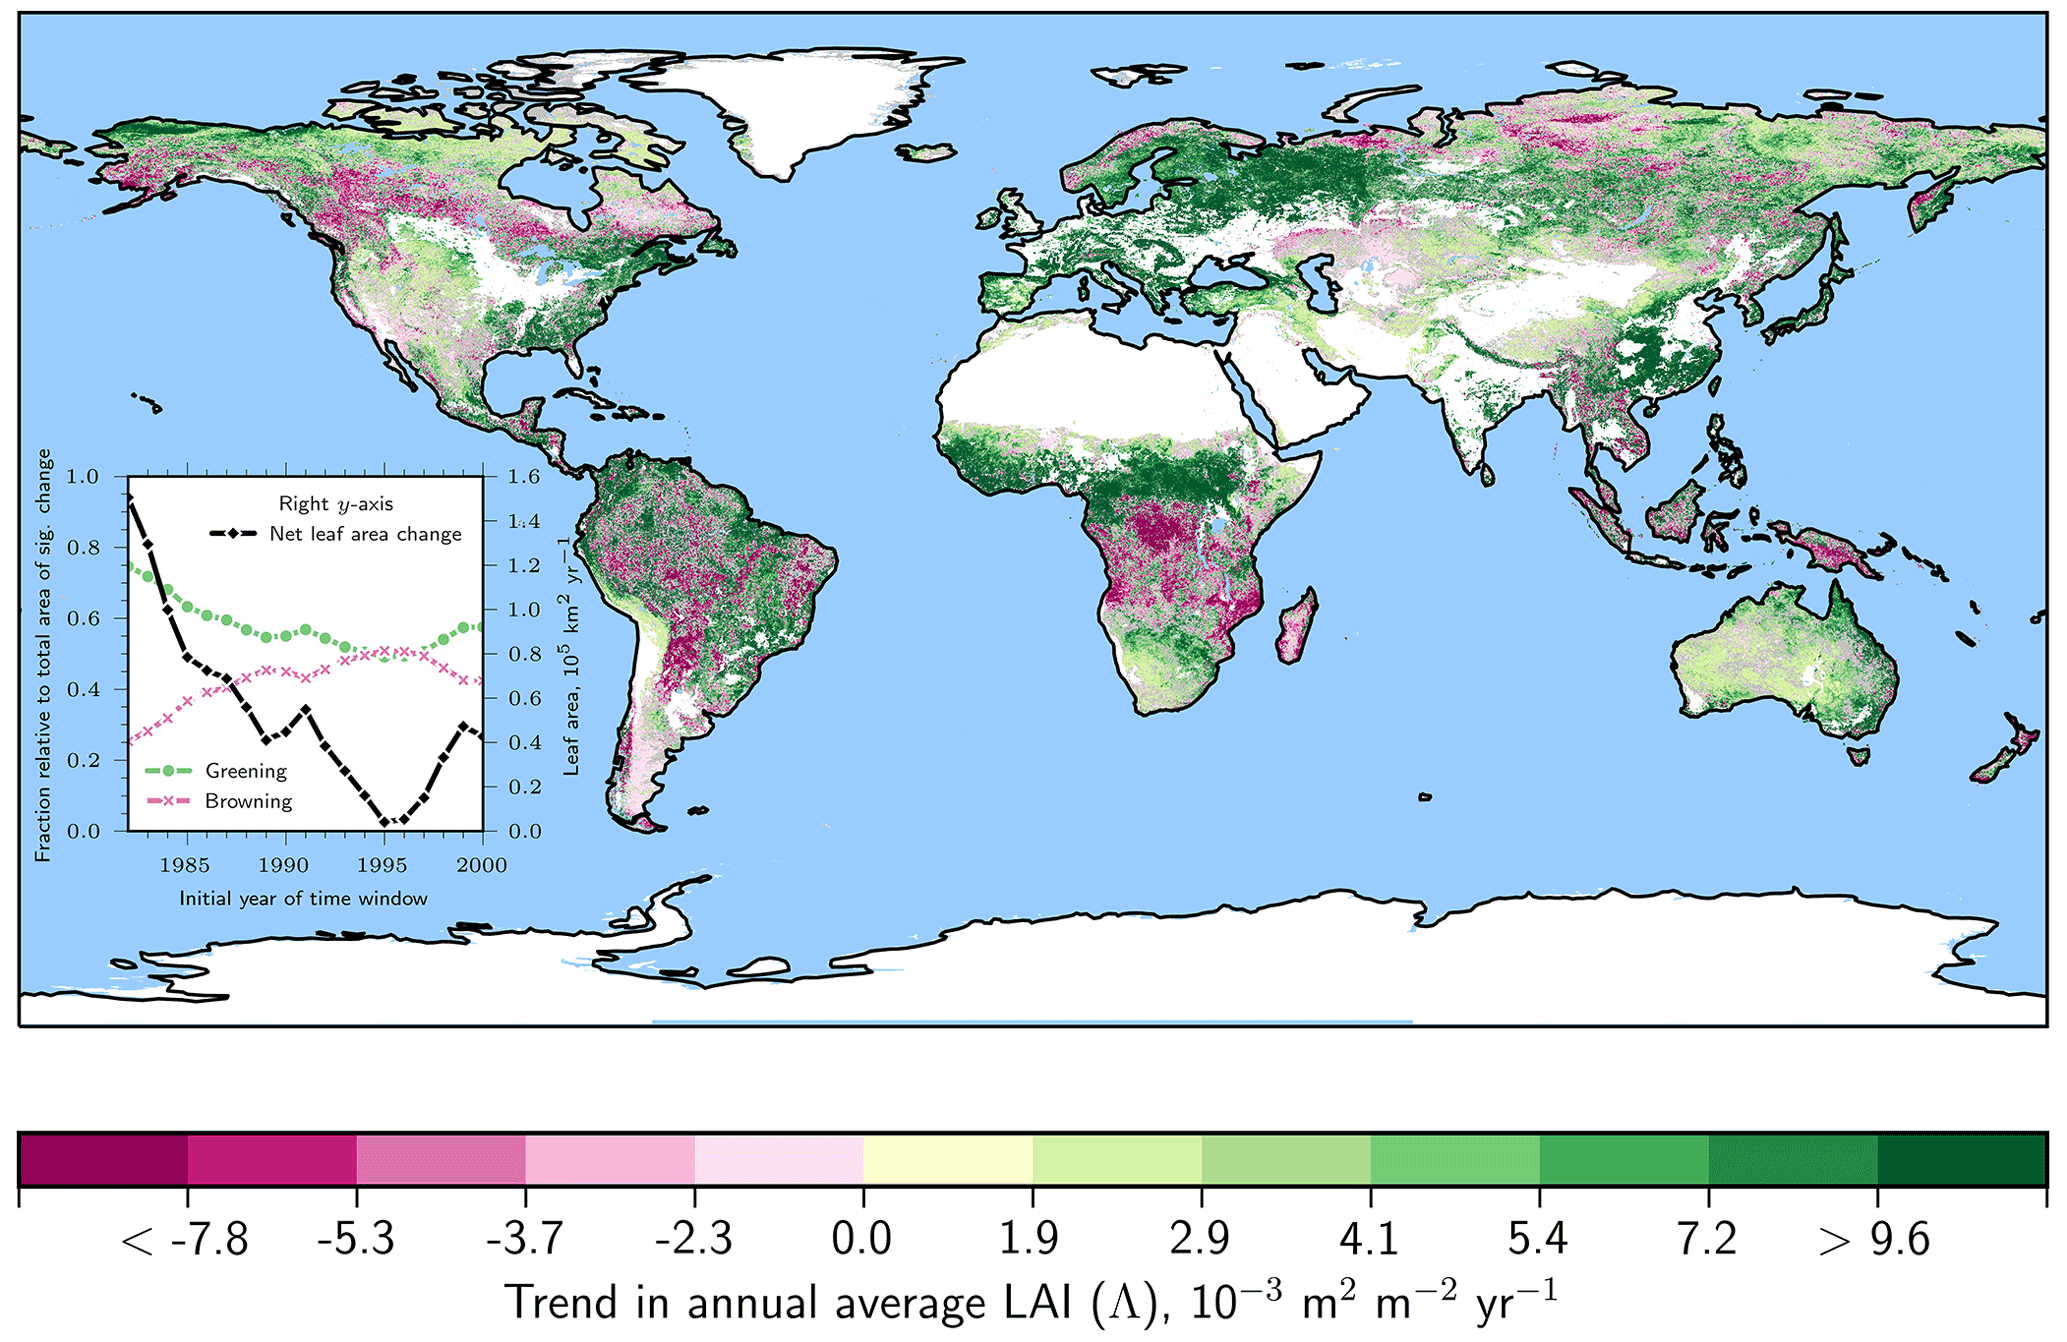 BG - Slowdown of the greening trend in natural vegetation with